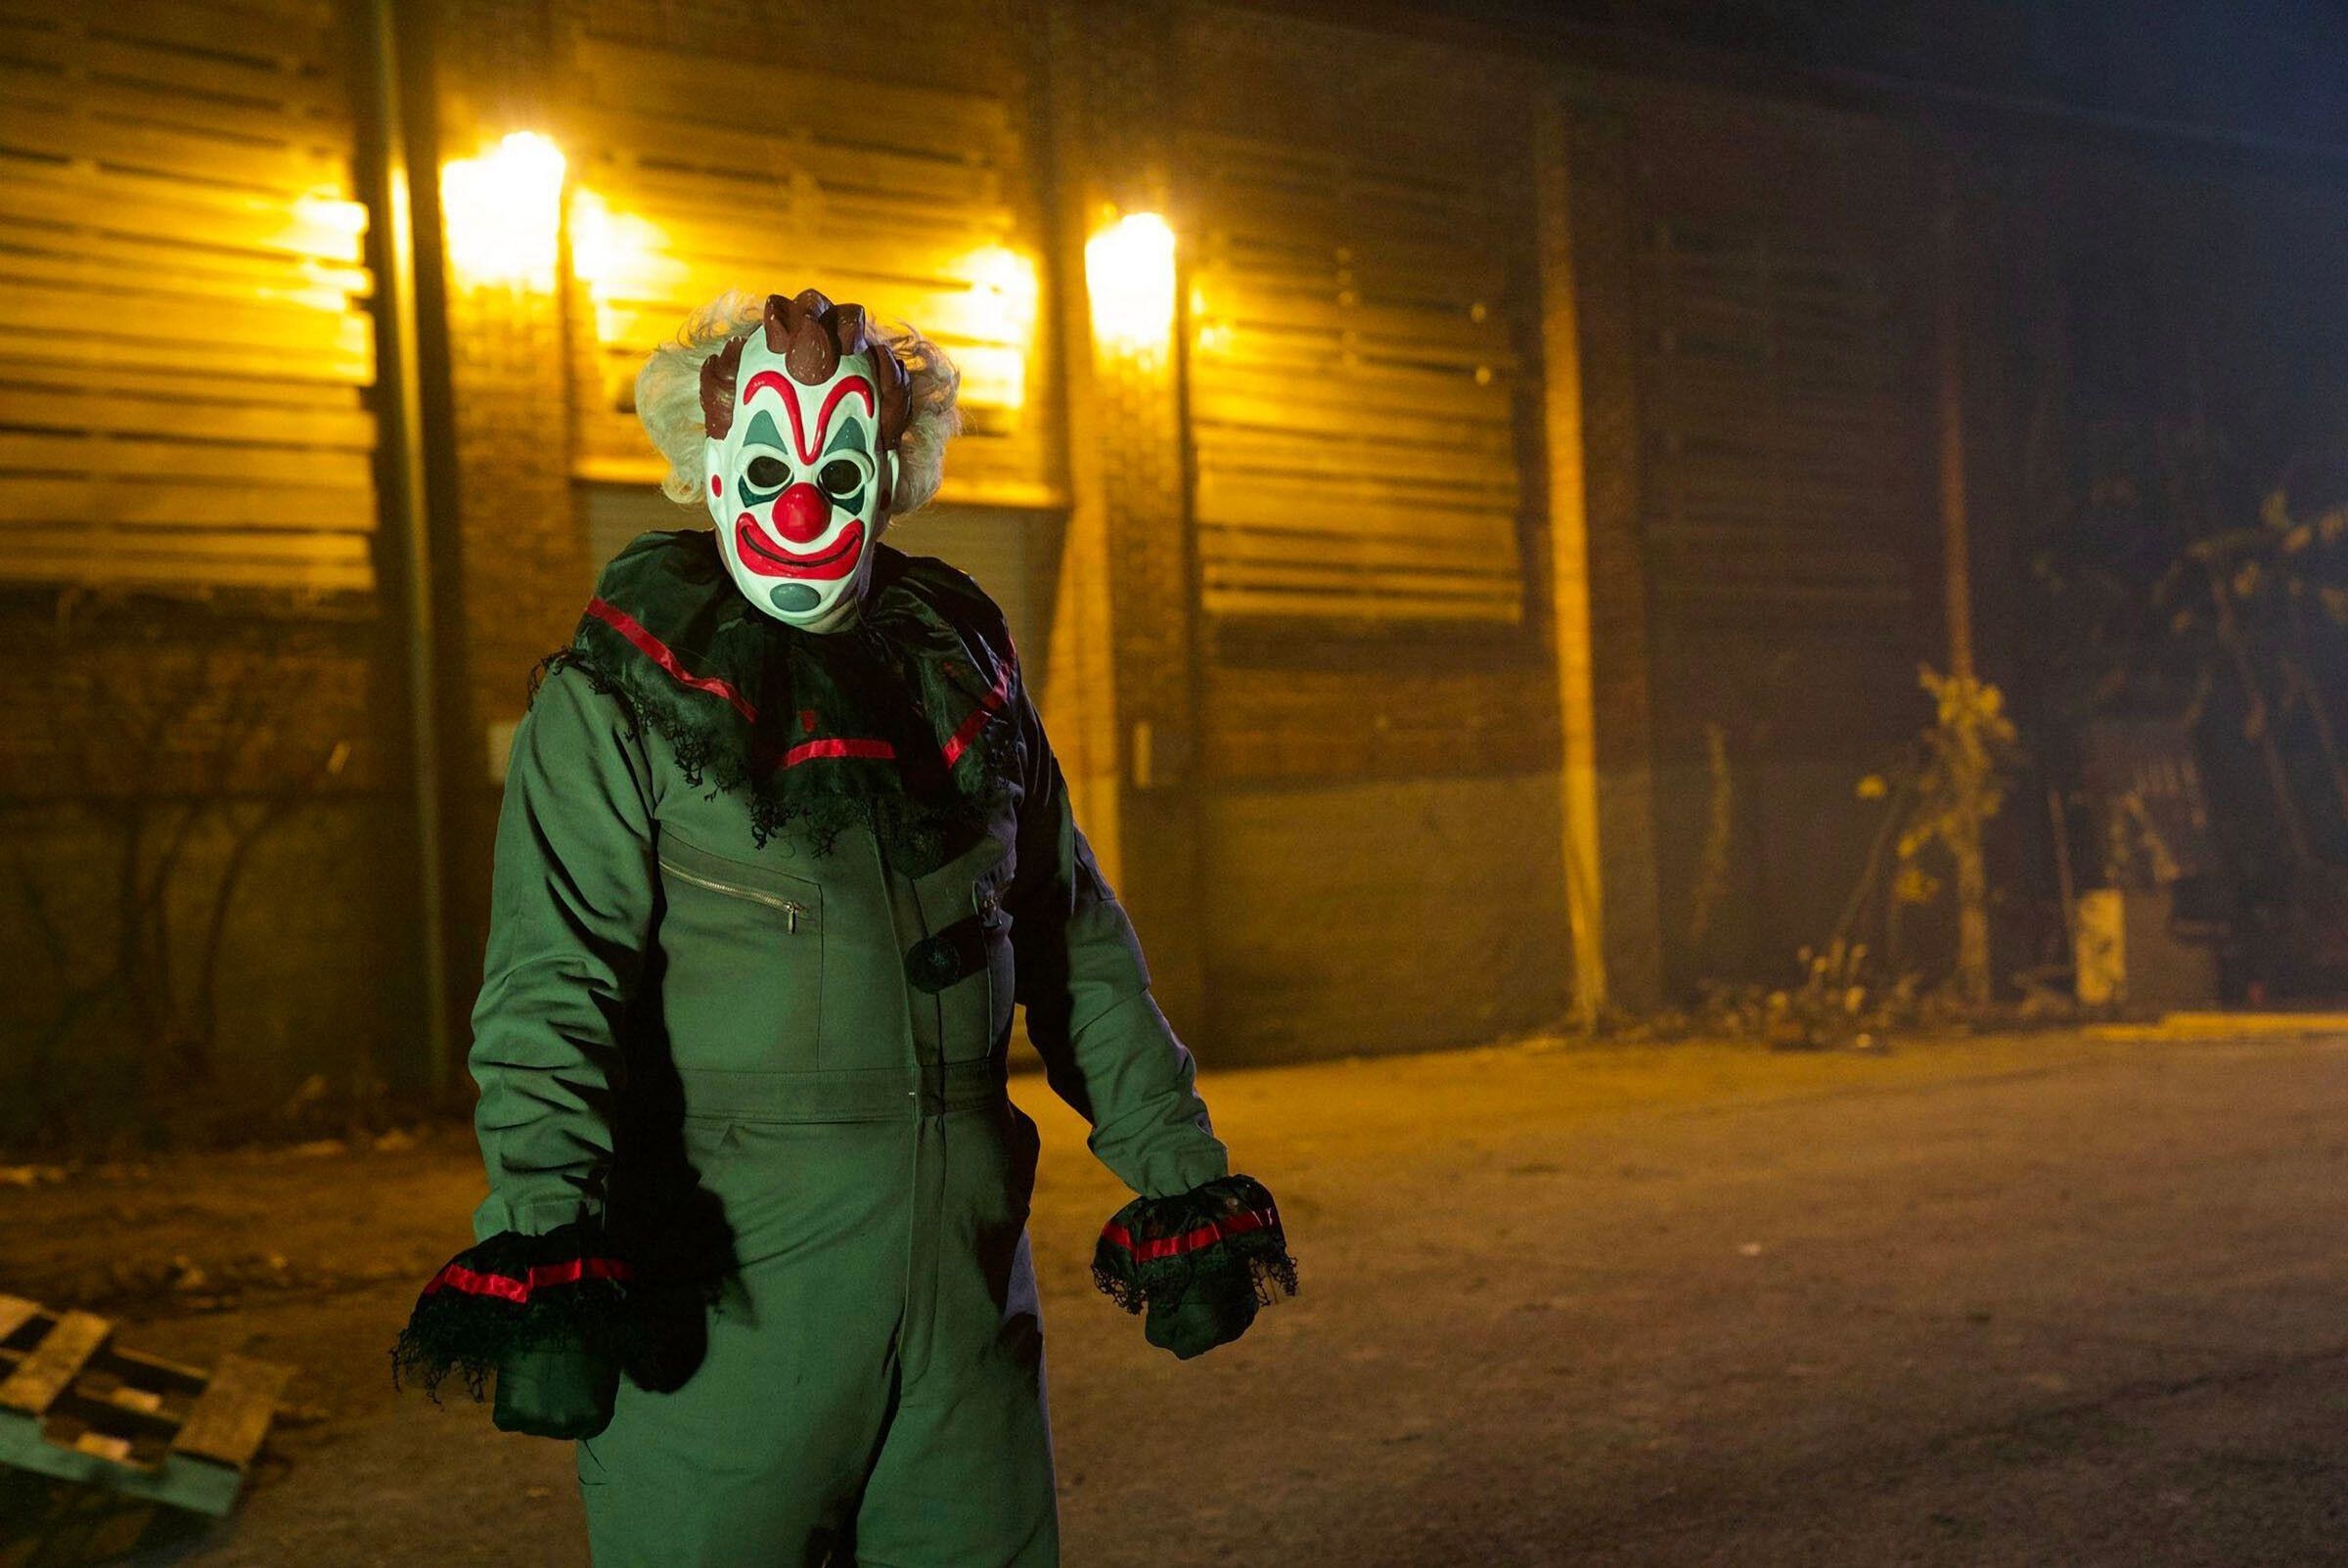 A menacing man in a clown mask stands outside a deserted warehouse